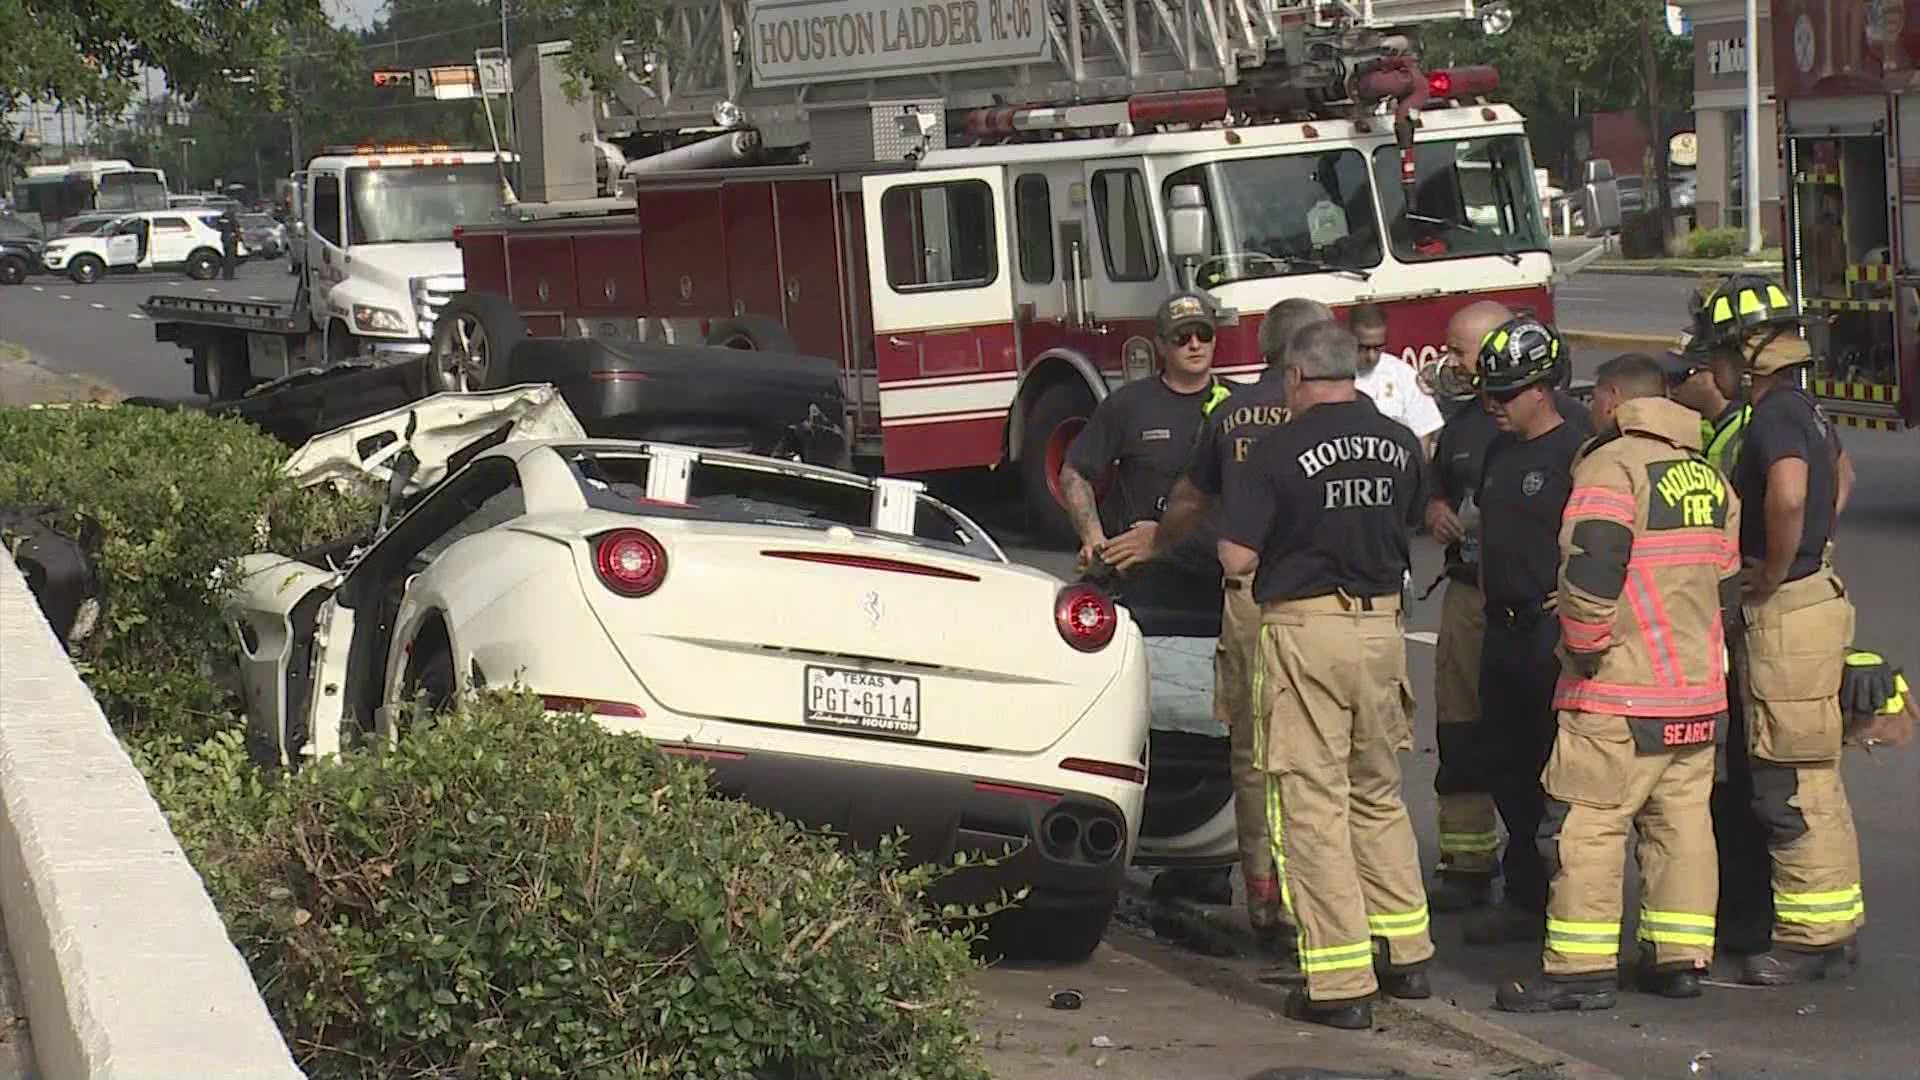 Two drivers are dead after an out-of-control Ferrari crashed into oncoming traffic Monday morning, according to the Houston Police Department.